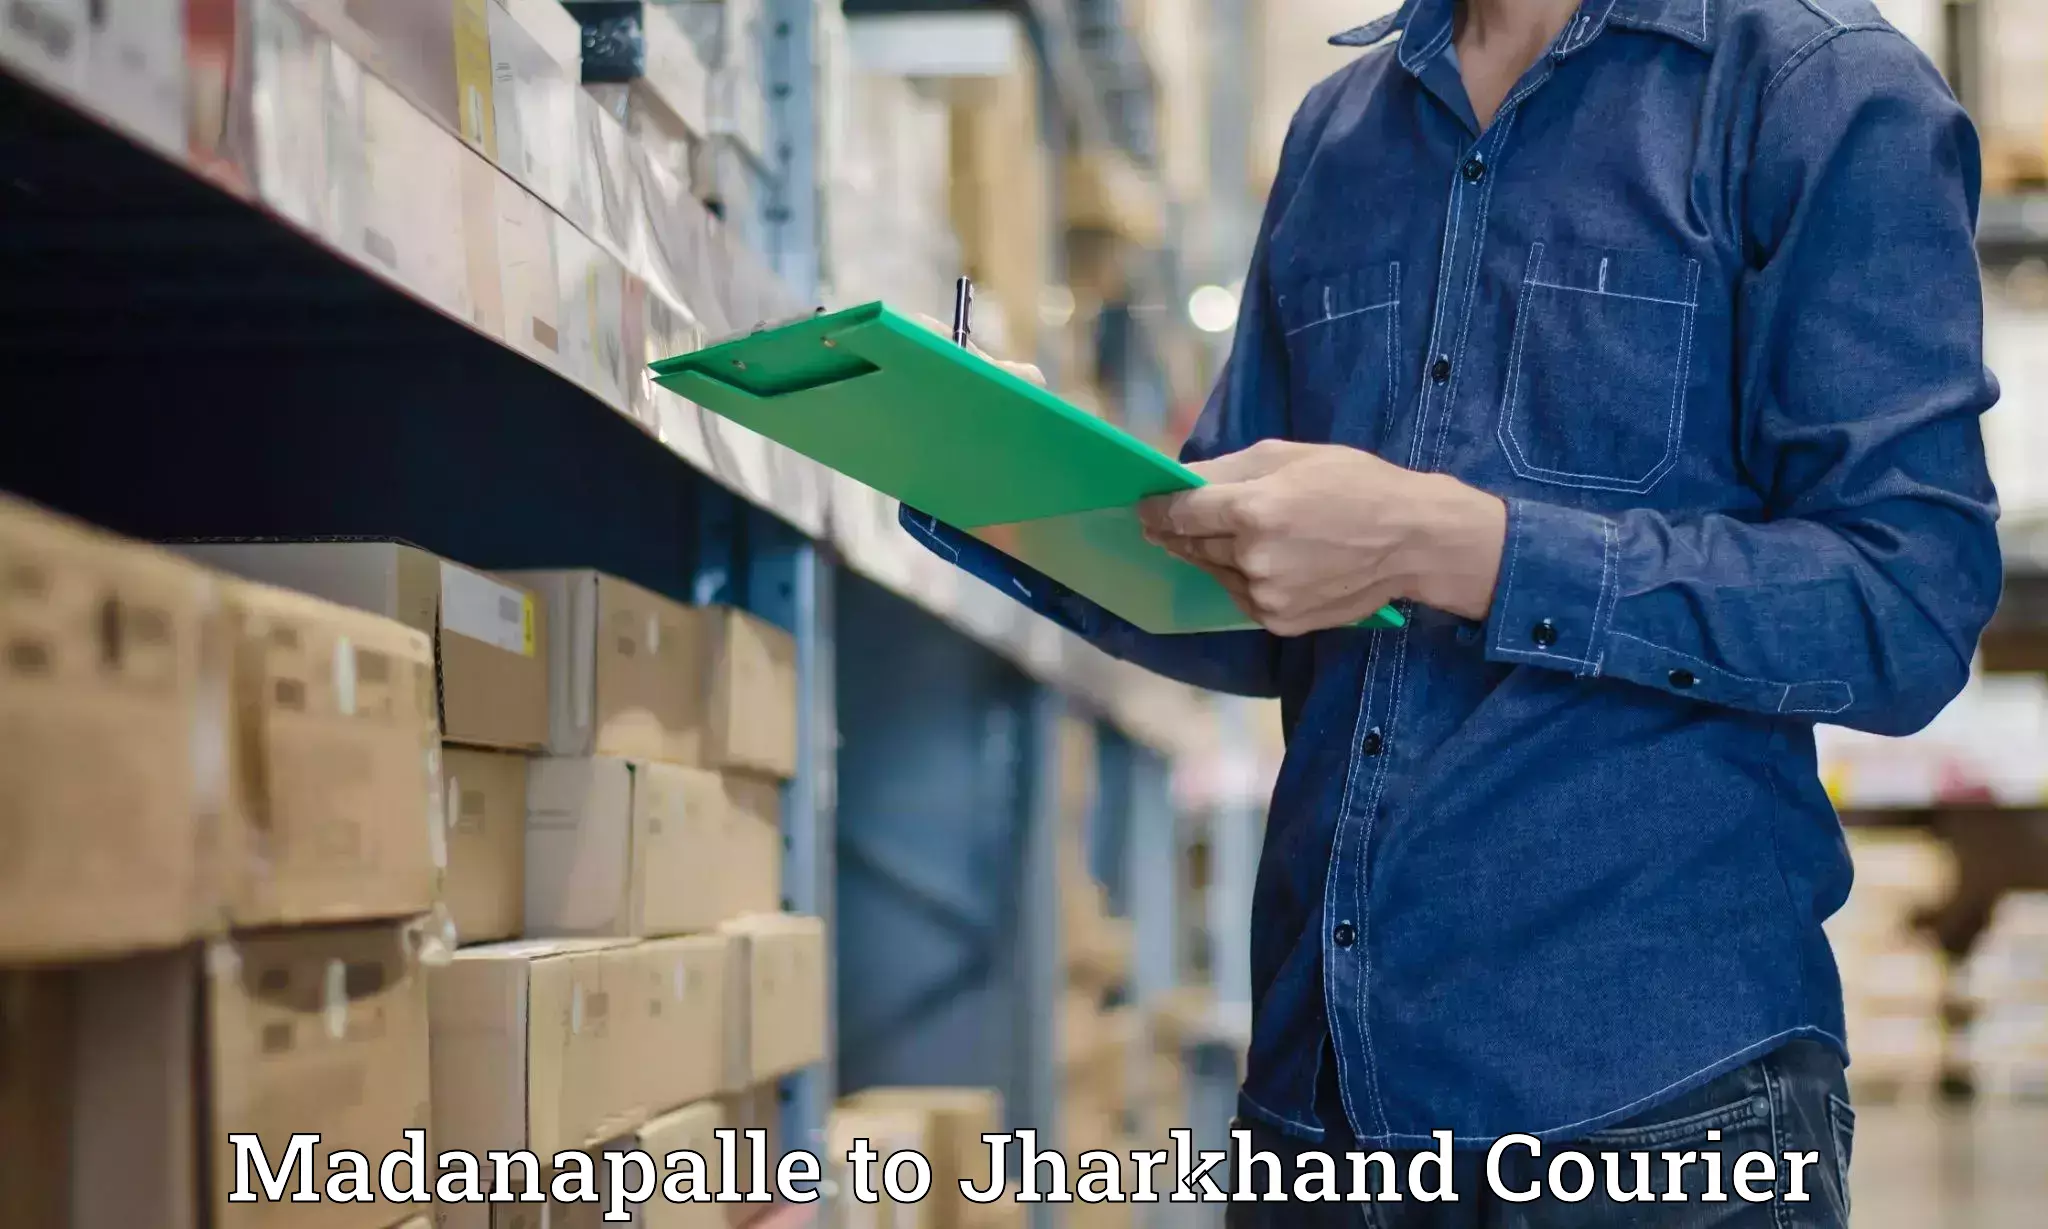 Professional courier handling Madanapalle to Poreyahat